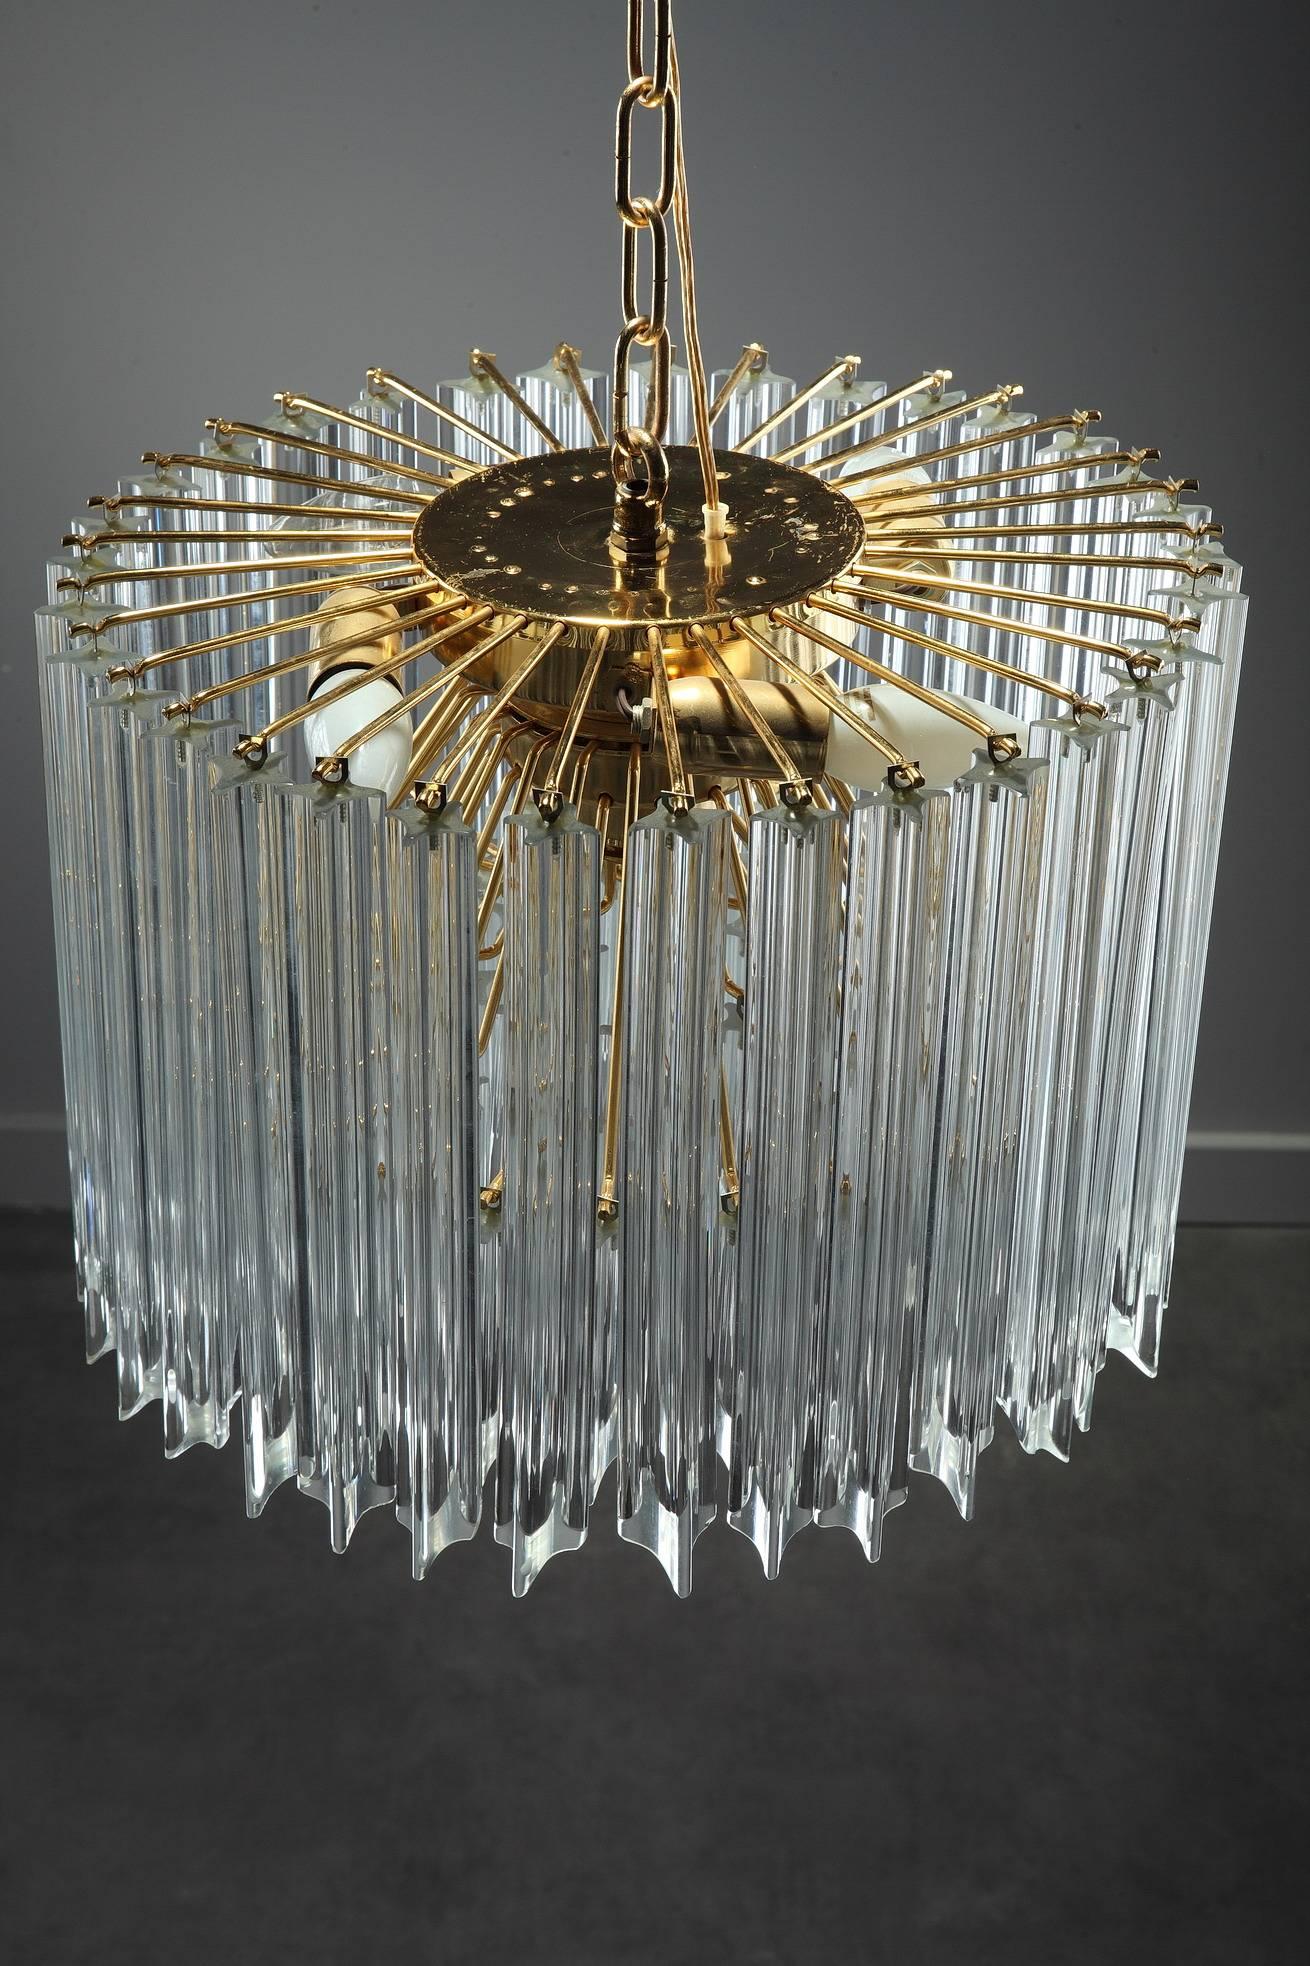 Circular chandelier designed by Paolo Venini for Murano in the 1970s, with long glass crystals on gilded metal mounts. It has 4-light bulbs. Complete, 

circa 1970
Dimensions: W 15.7 in, D 15.7 in, H 35.4 in.
Dimensions: L 40 cm, P 40 cm, H 90